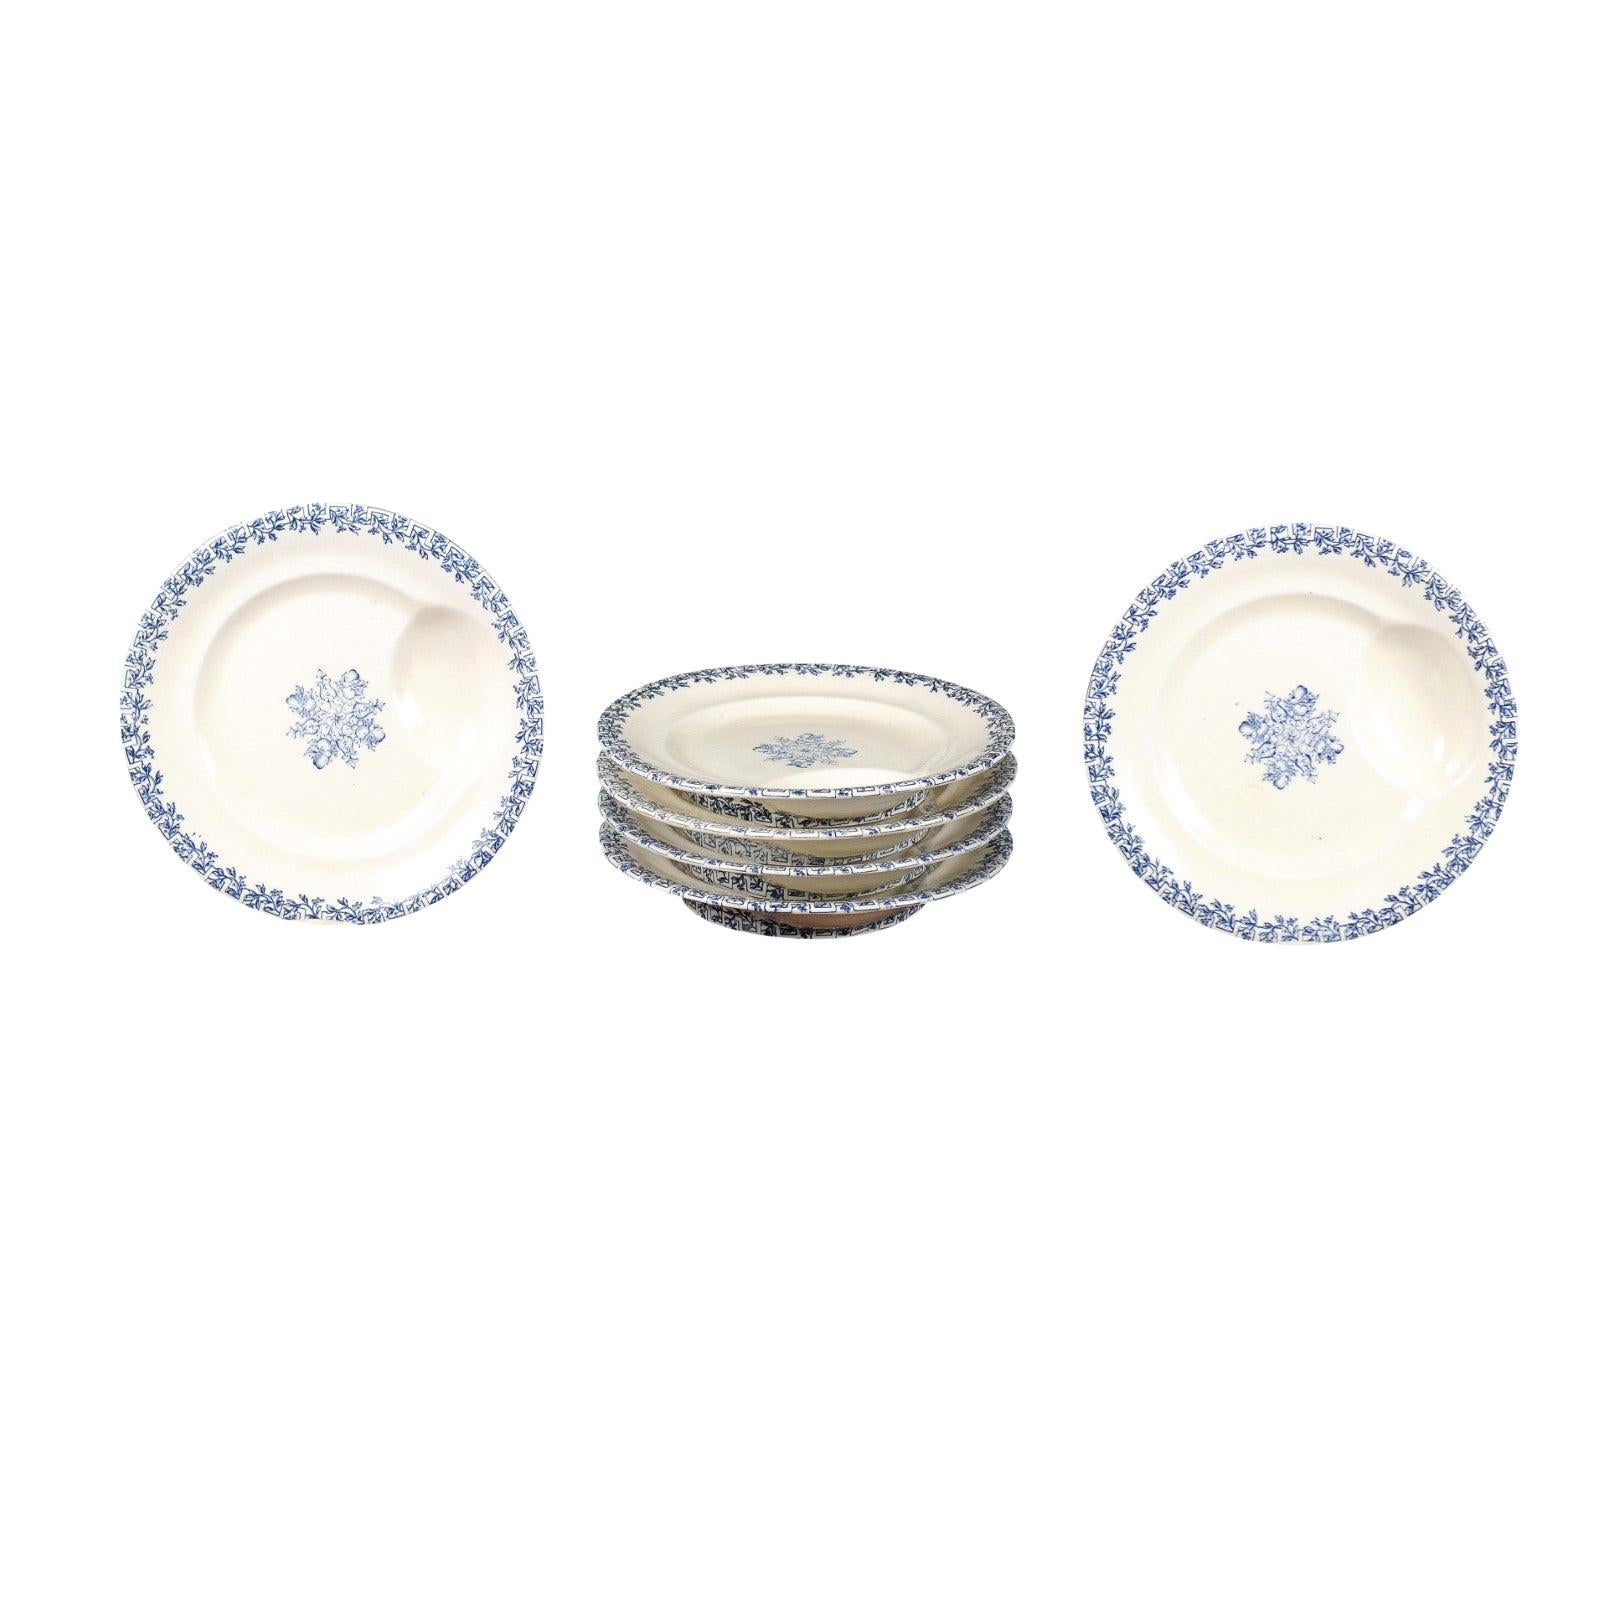 French Terre de Fer 19th Century Blue and White Asparagus Plates, Six Available For Sale